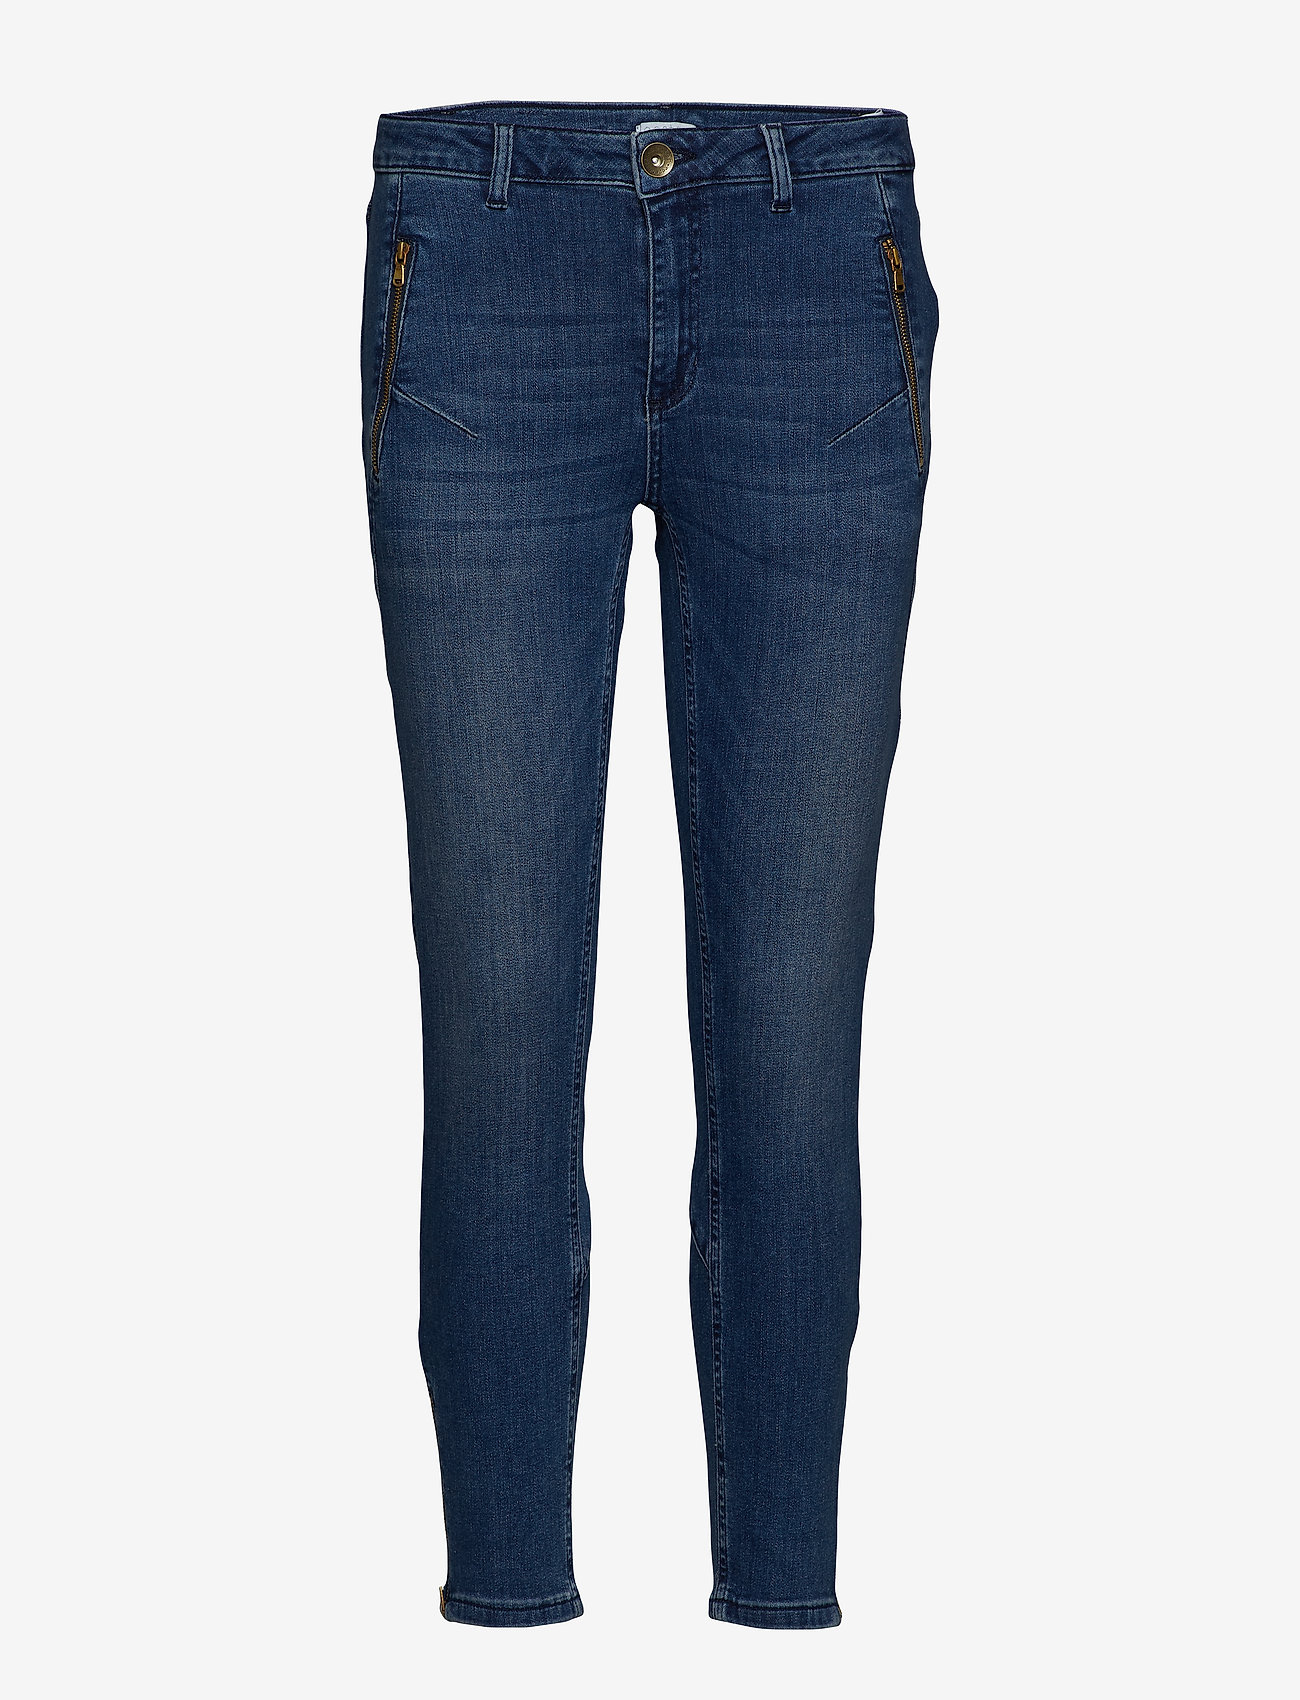 Coster Copenhagen - Relaxed Jeans in 7/8 length - skinny jeans - indigo blue - 0